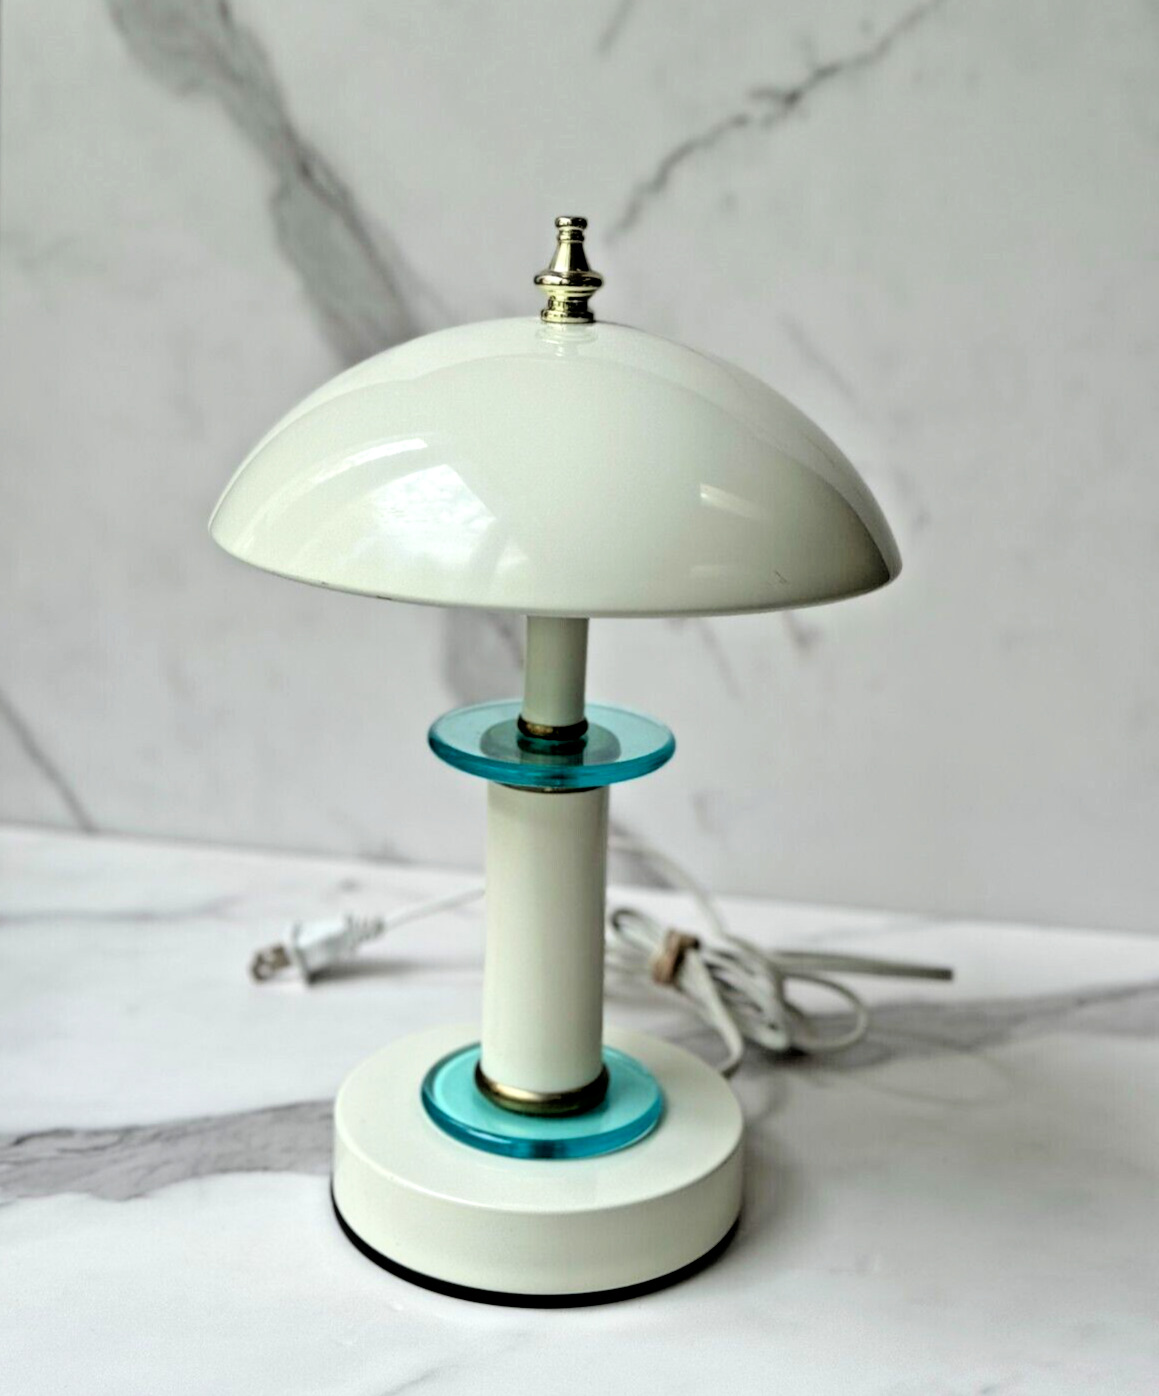 Vintage MEMPHIS DESIGN White Metal TOUCH Table LAMP, Dome Shade Atomic Style